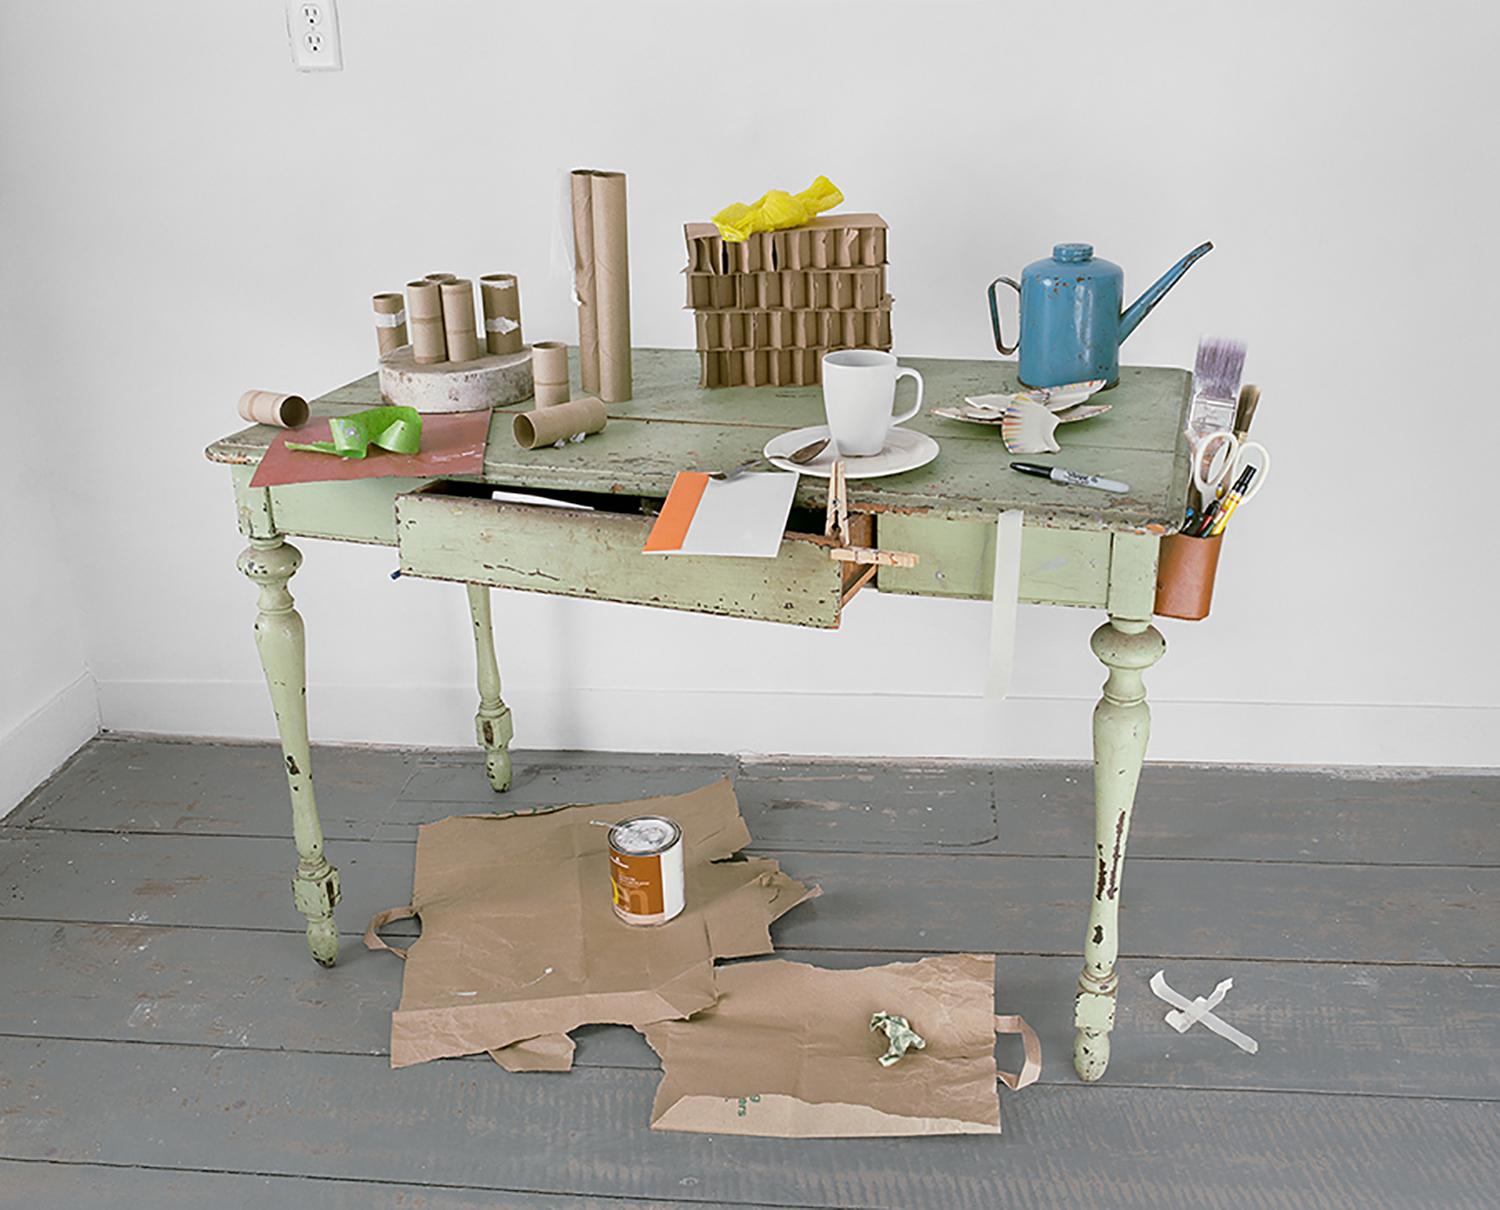 David Halliday Color Photograph - Green Table (Light Filled Still Life Photo w/ Oil Can & Tea Cup), Artist Frame